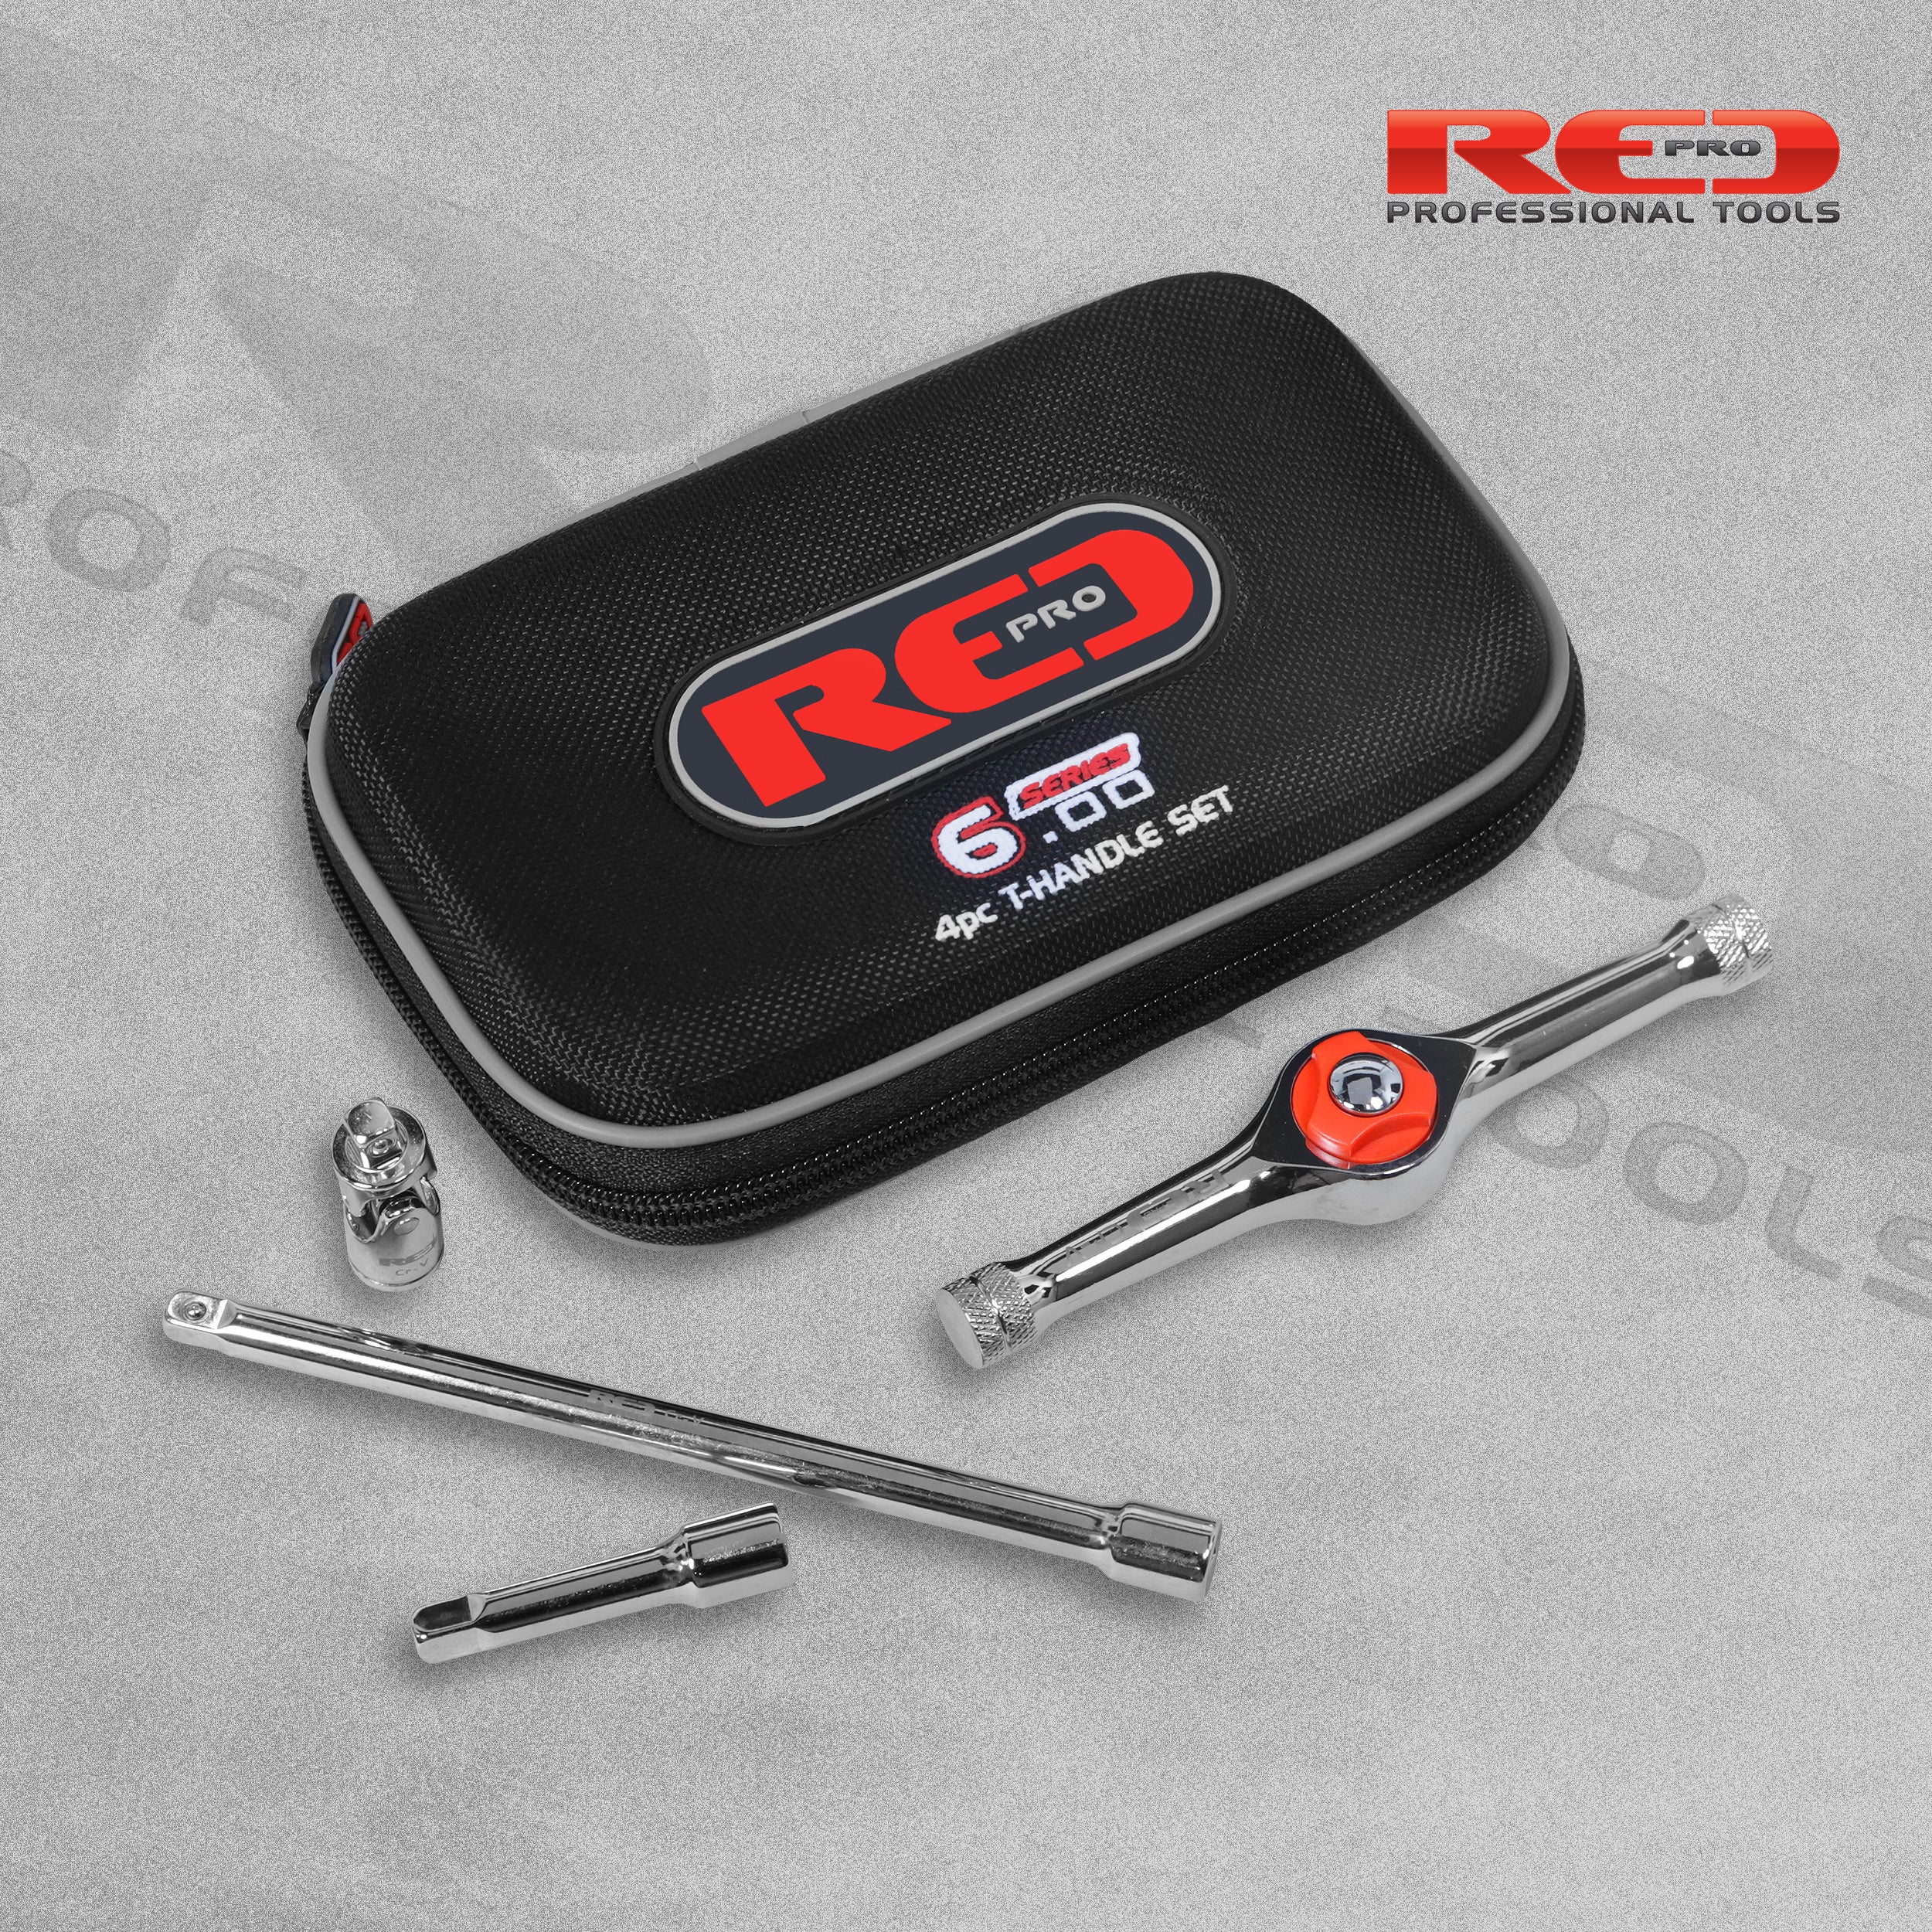 Red Pro Tools 4pc T-Handle Set 1/4" Drive (6.00 Series)